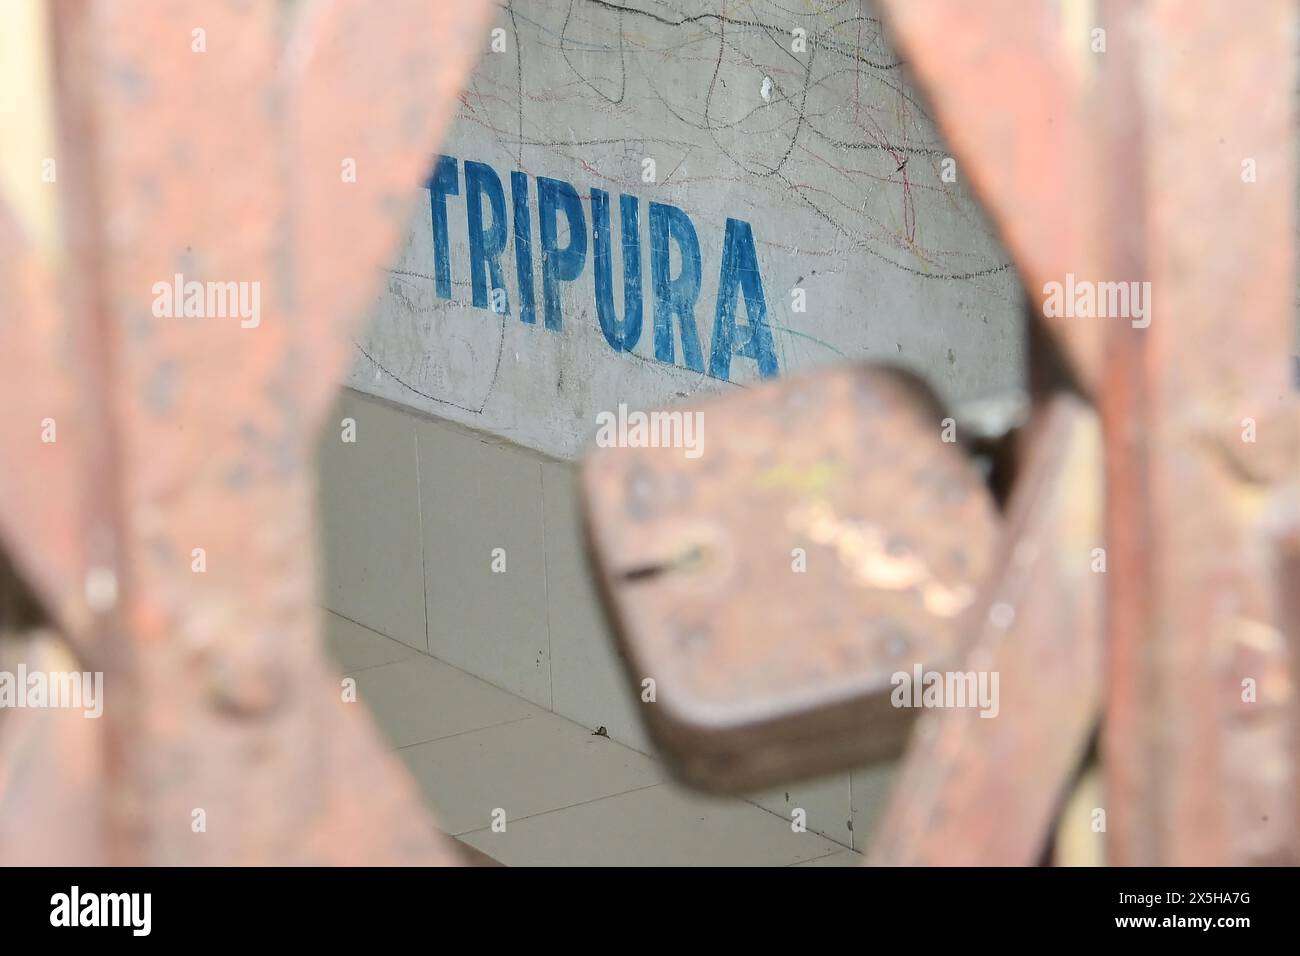 The Additional Secretary of the Education Department, Government of Tripura, has announced the closure of all Government, Government-Aided, and privately managed schools from April 24th to 27th due to the intense heat wave sweeping across the state. Tripura, India. Stock Photo